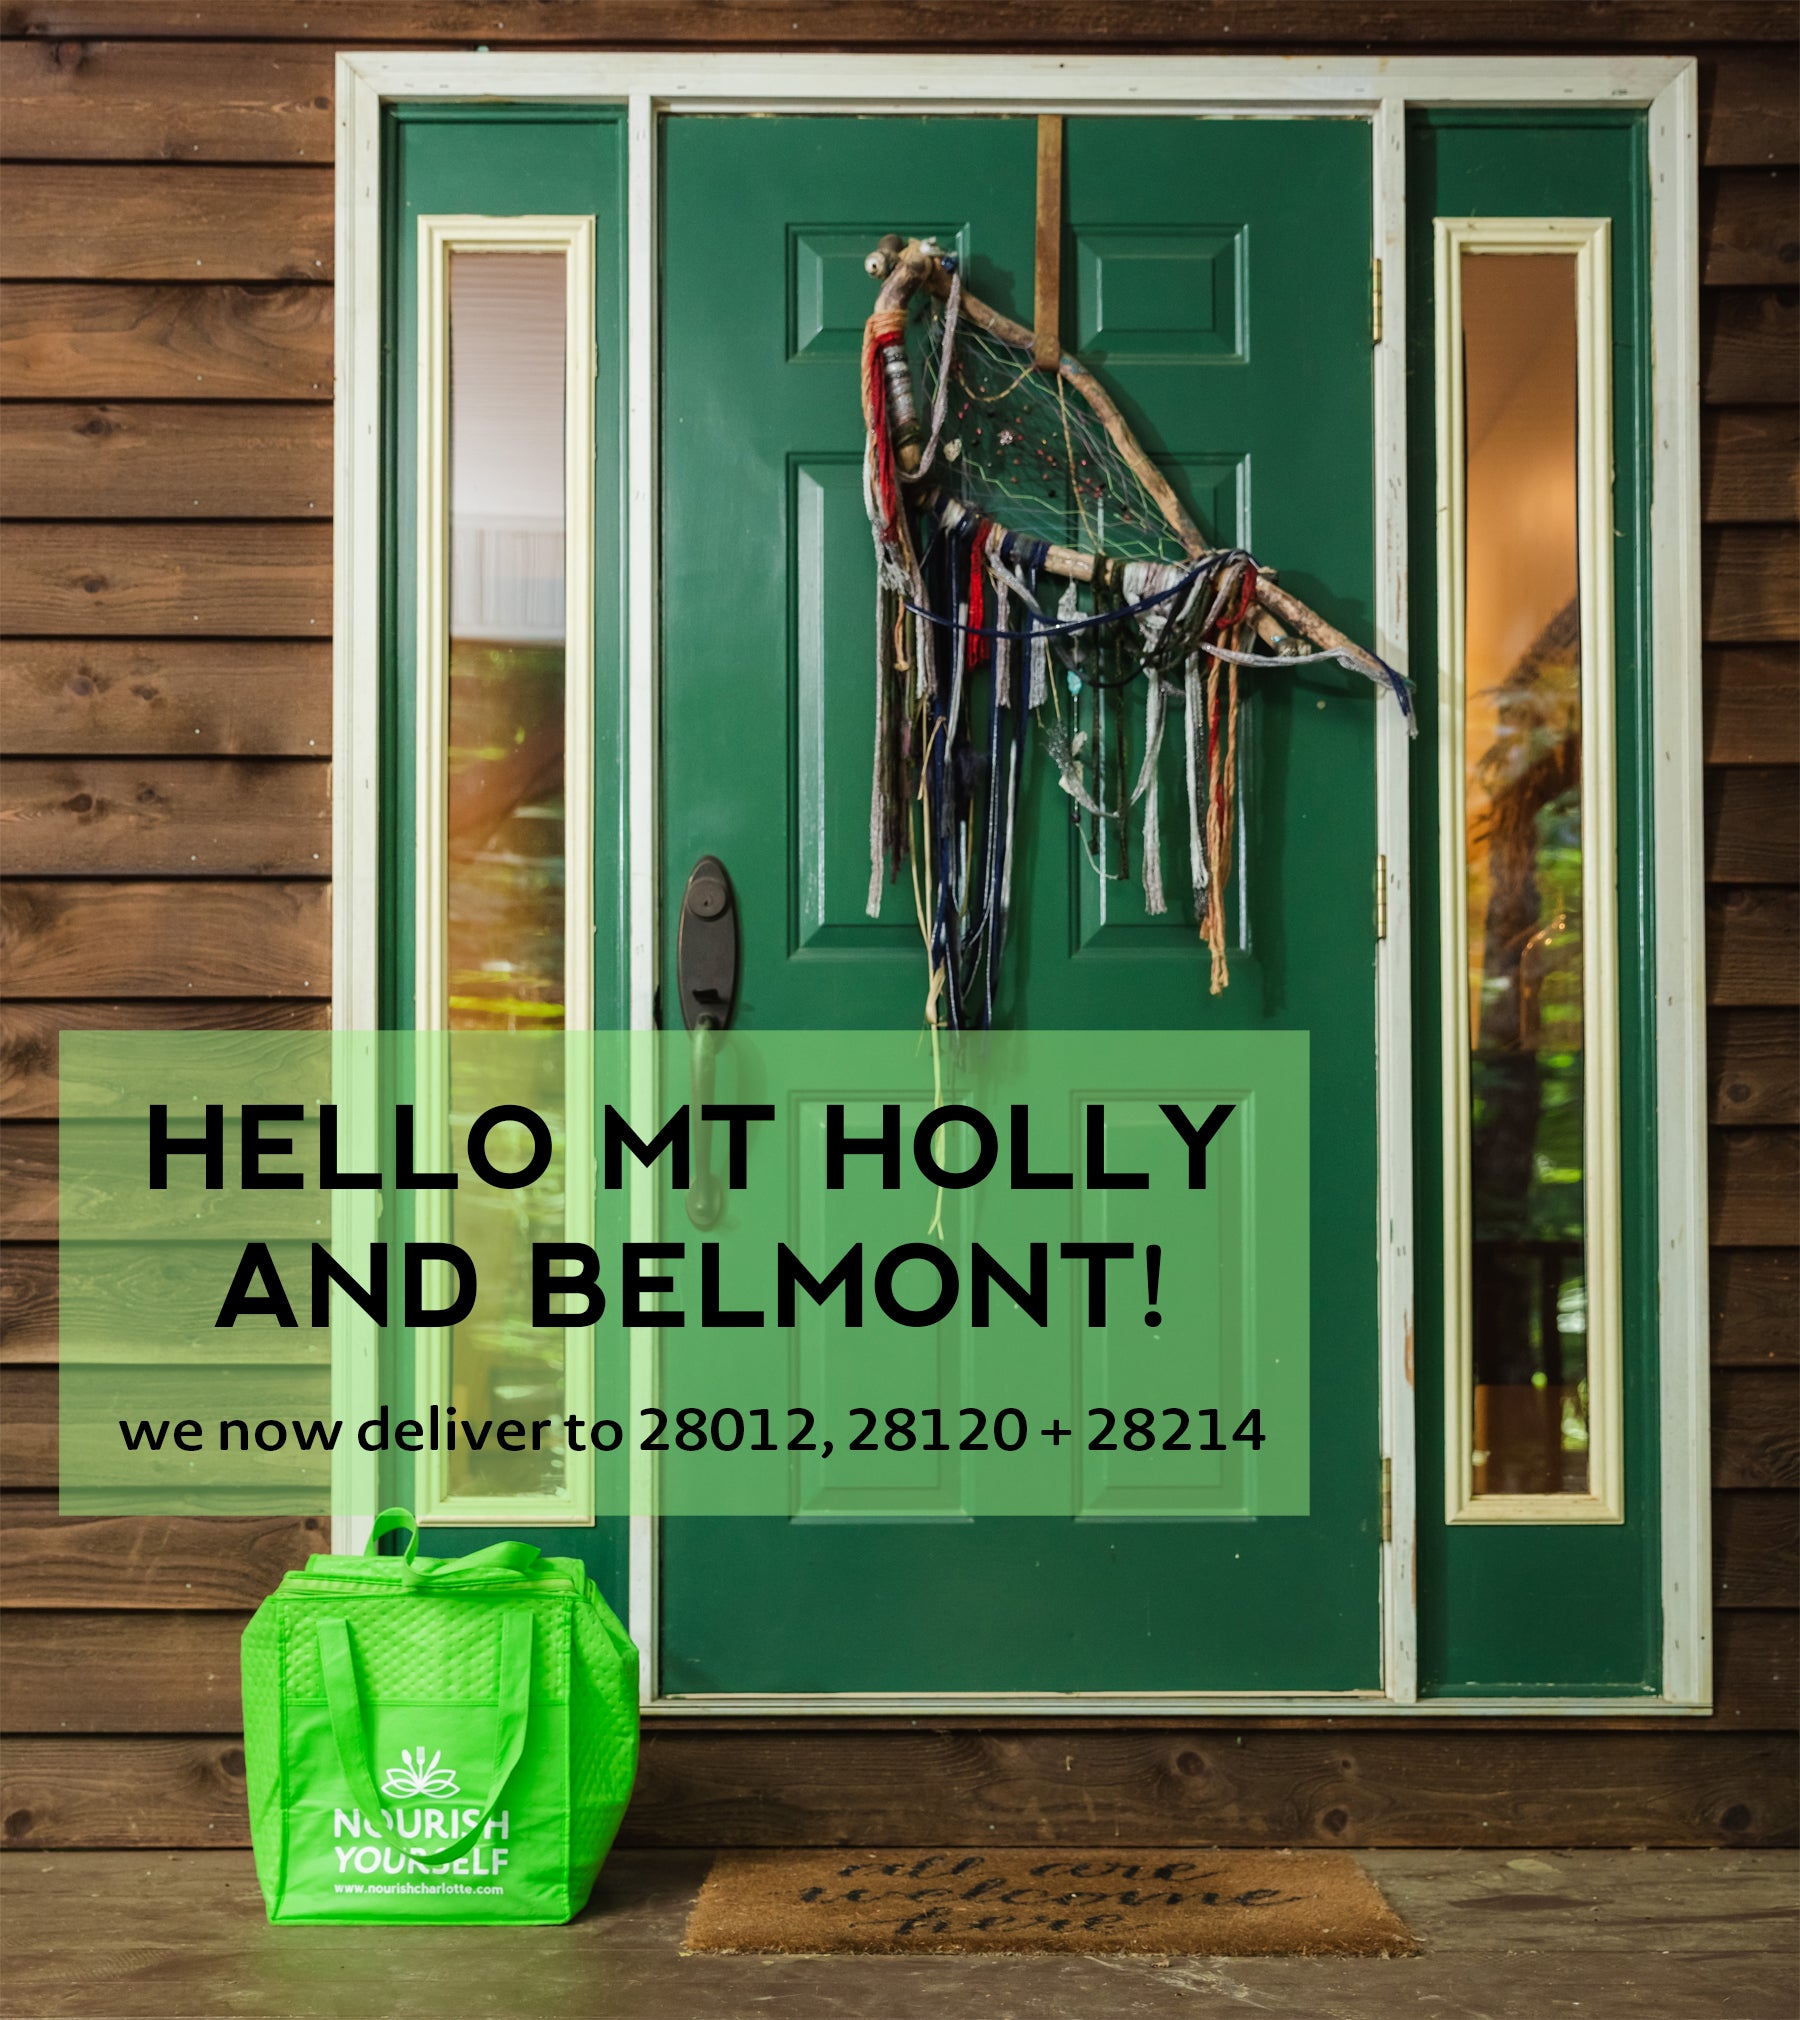 WELCOME MT HOLLY AND BELMONT! We now deliver to 28012, 28214 and 28120! 😍